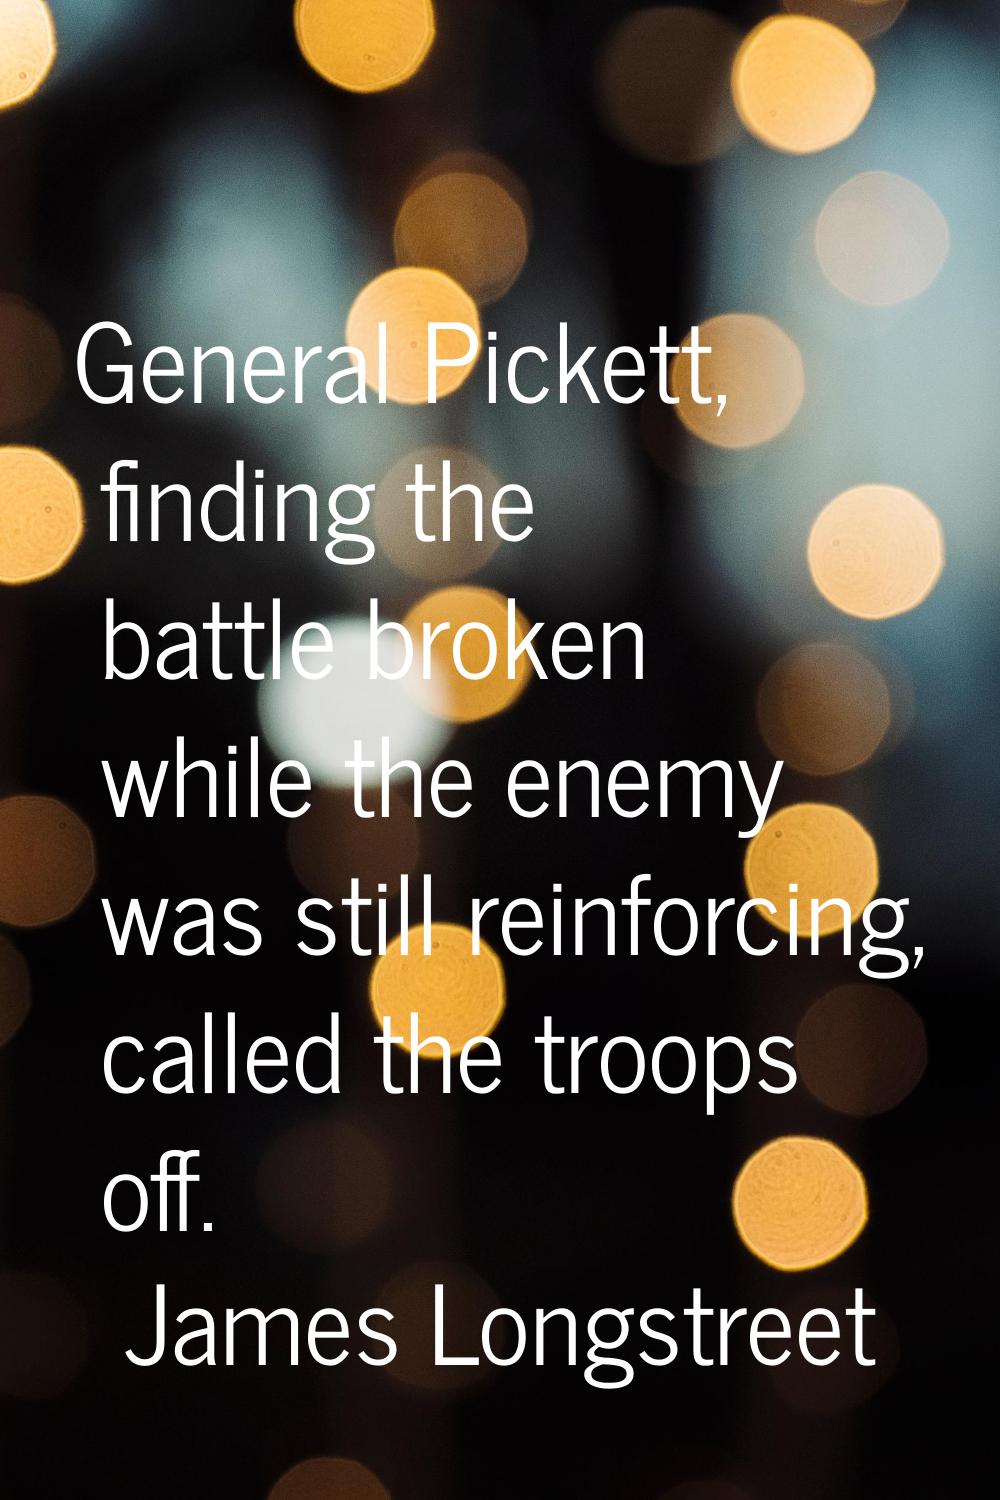 General Pickett, finding the battle broken while the enemy was still reinforcing, called the troops